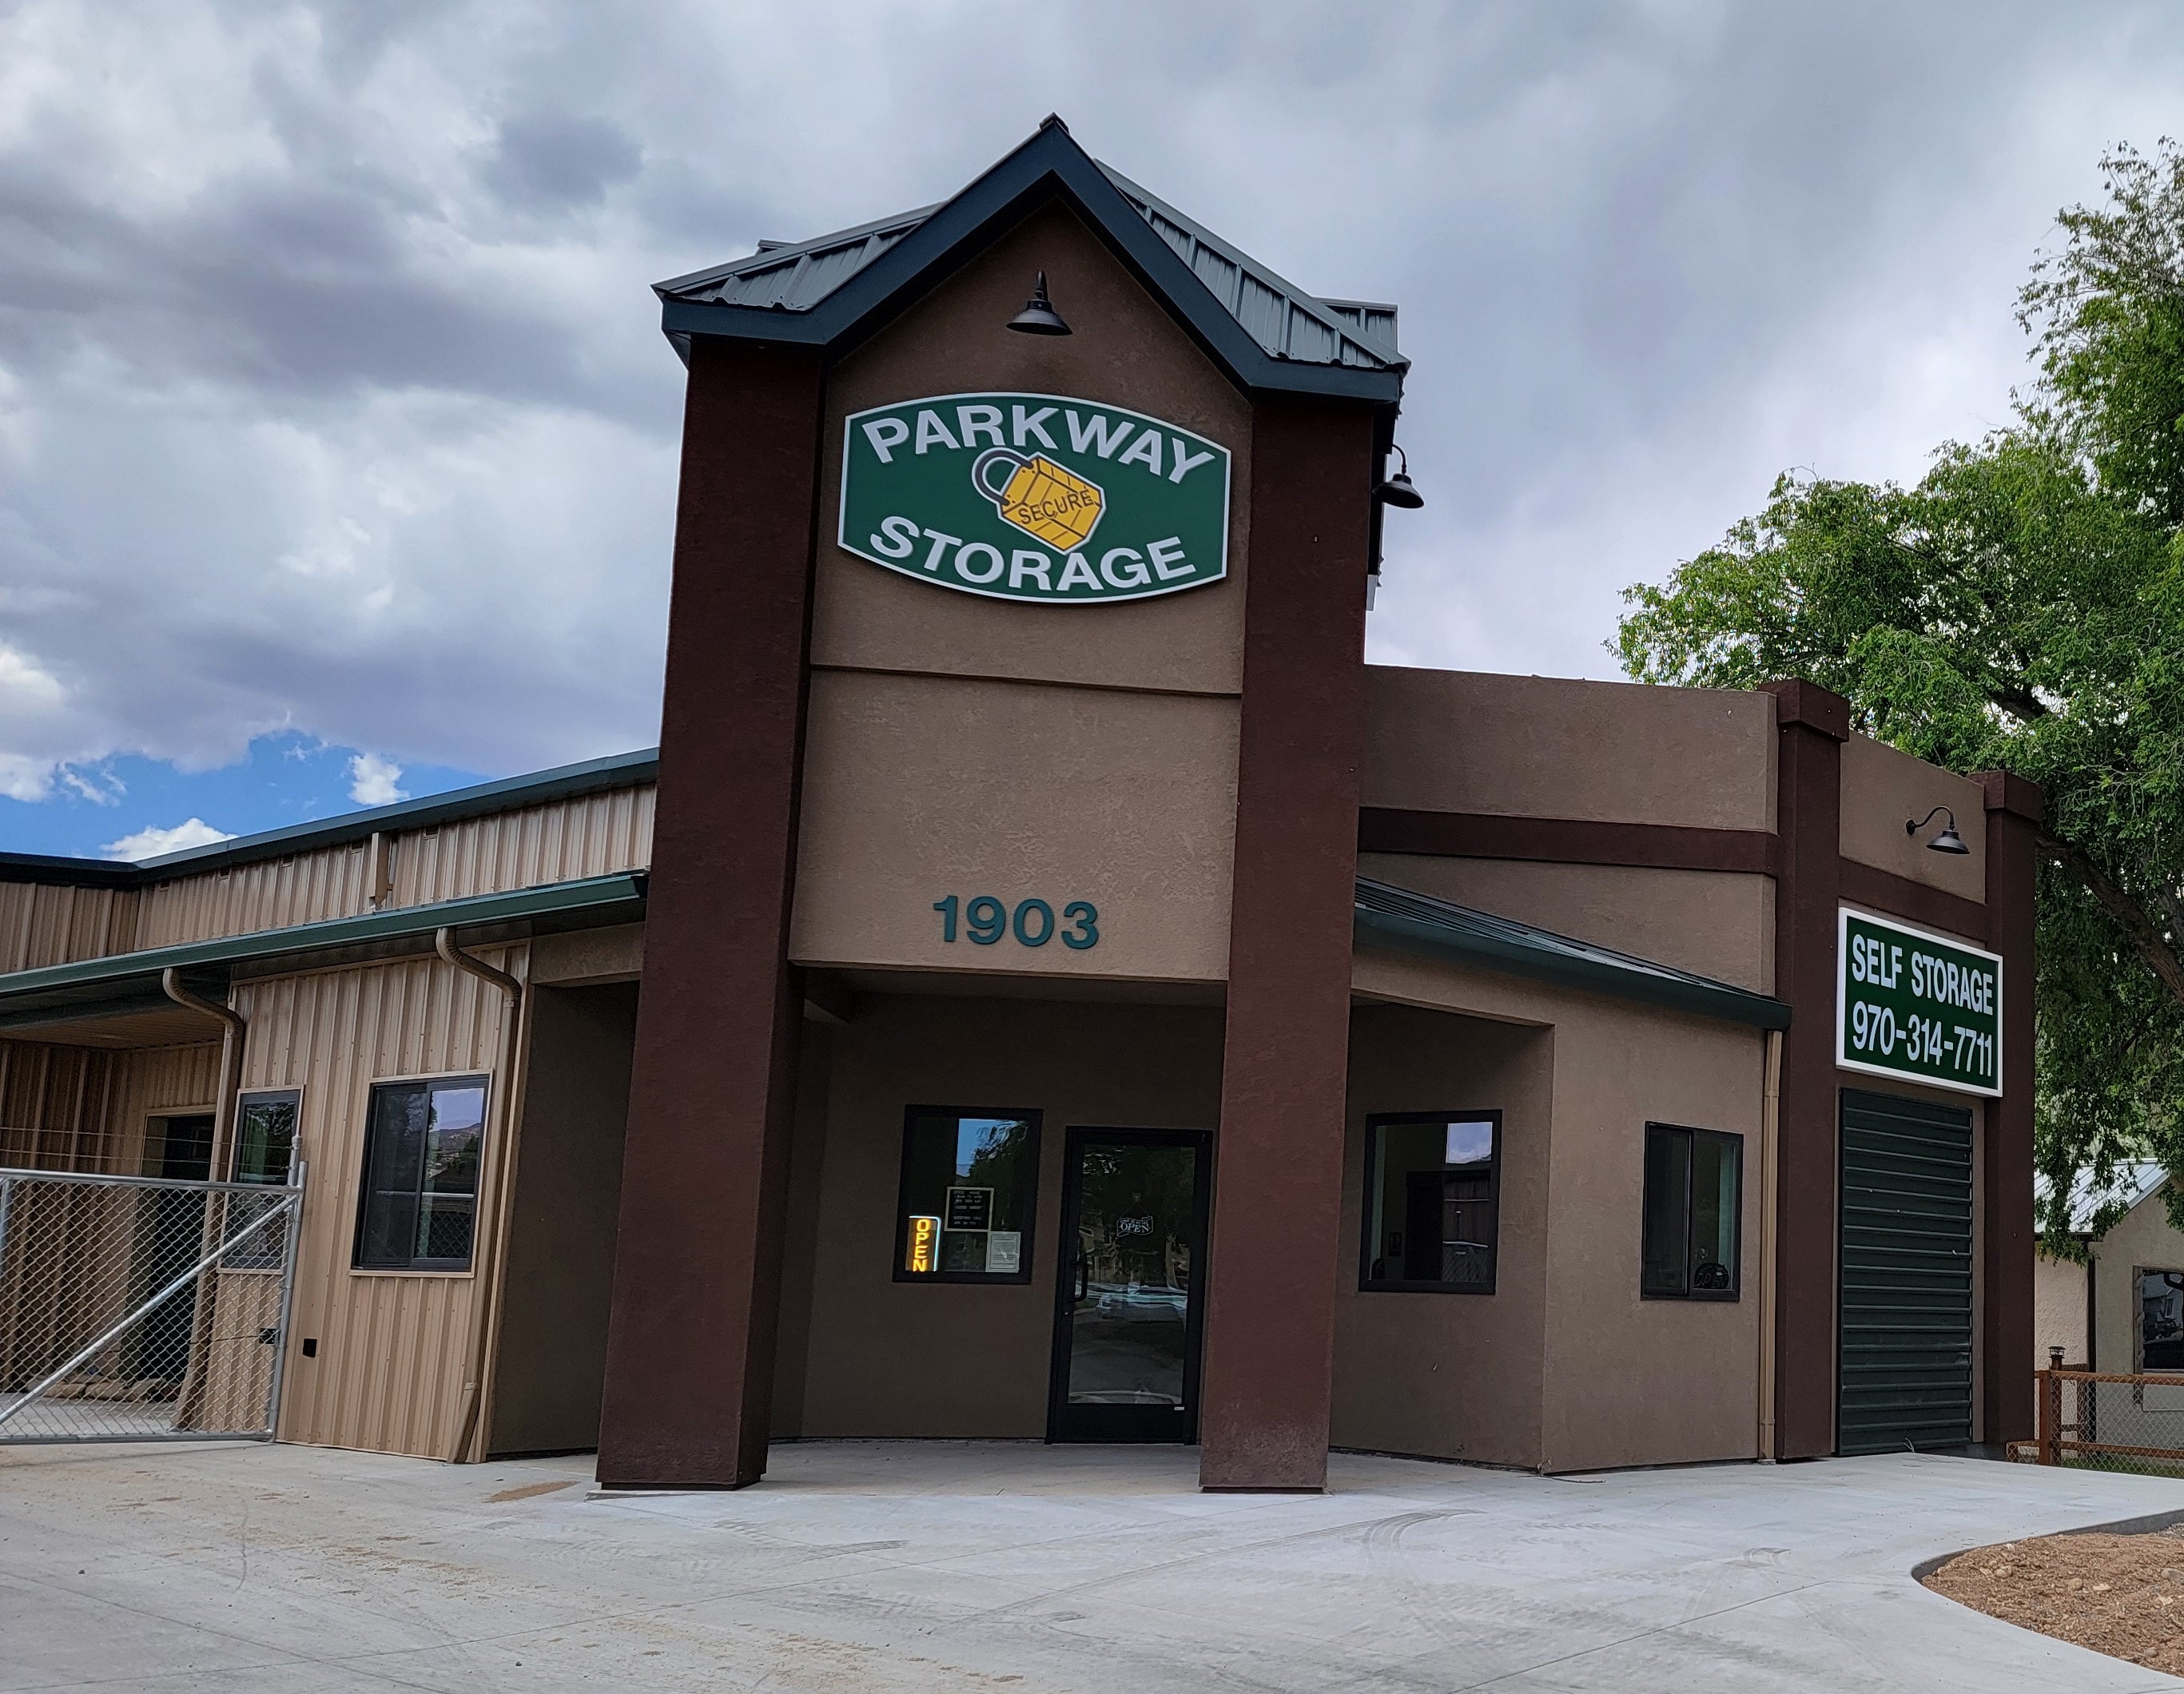 Parkway Storage Orchard Mesa Office